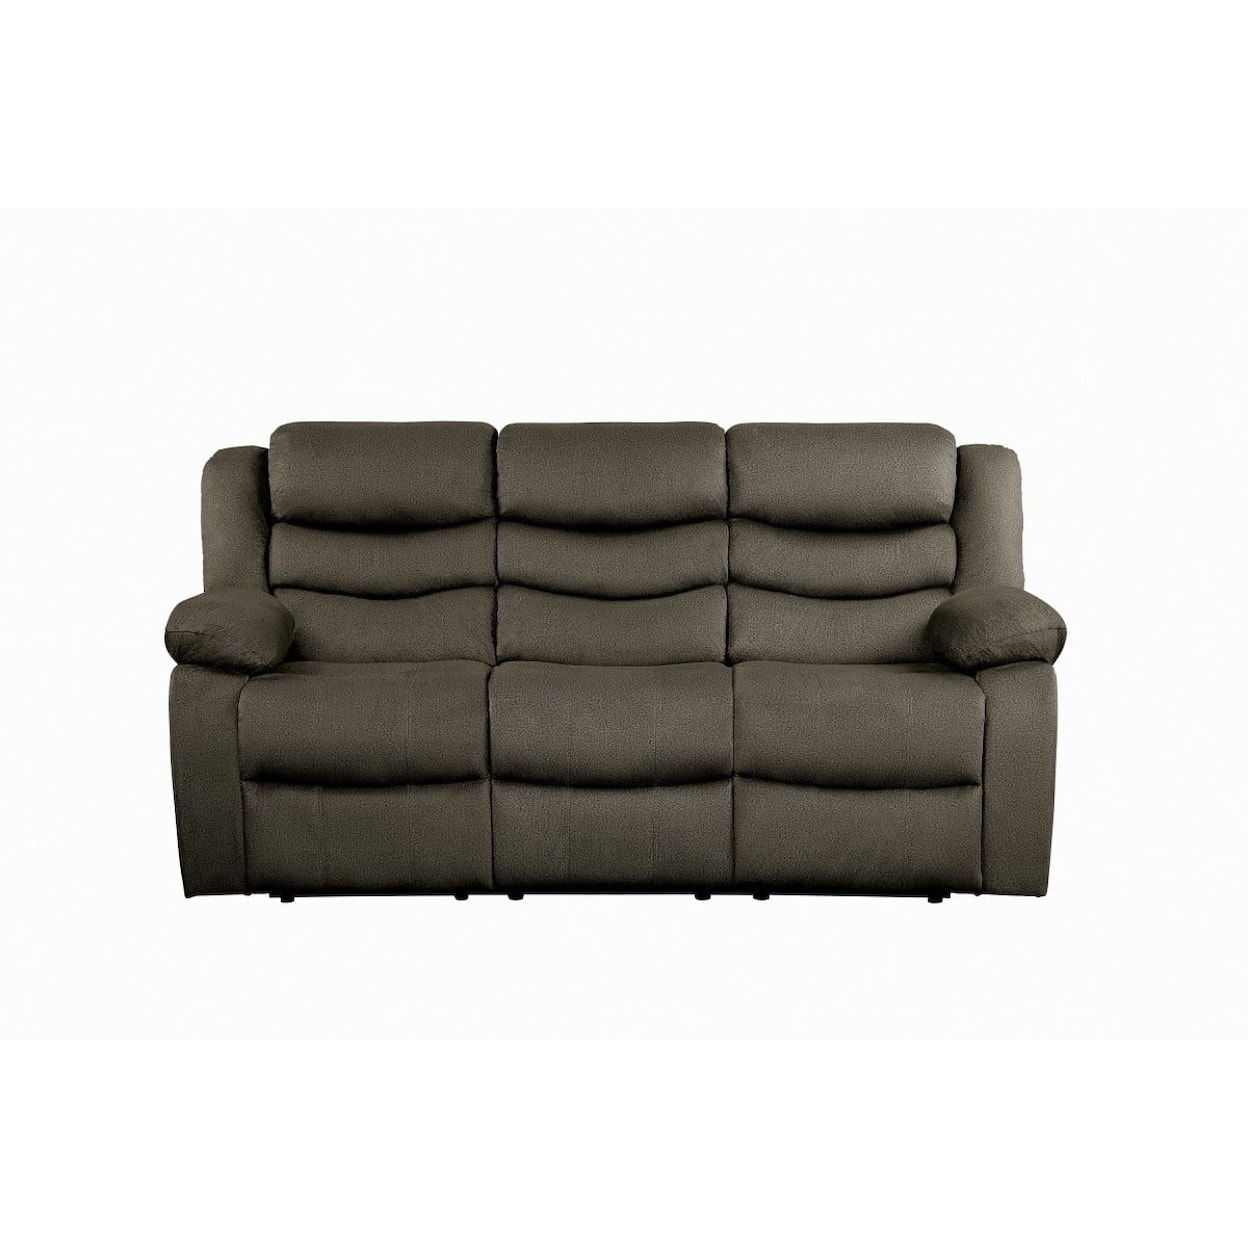 Homelegance Furniture Discus Double Reclining Sofa